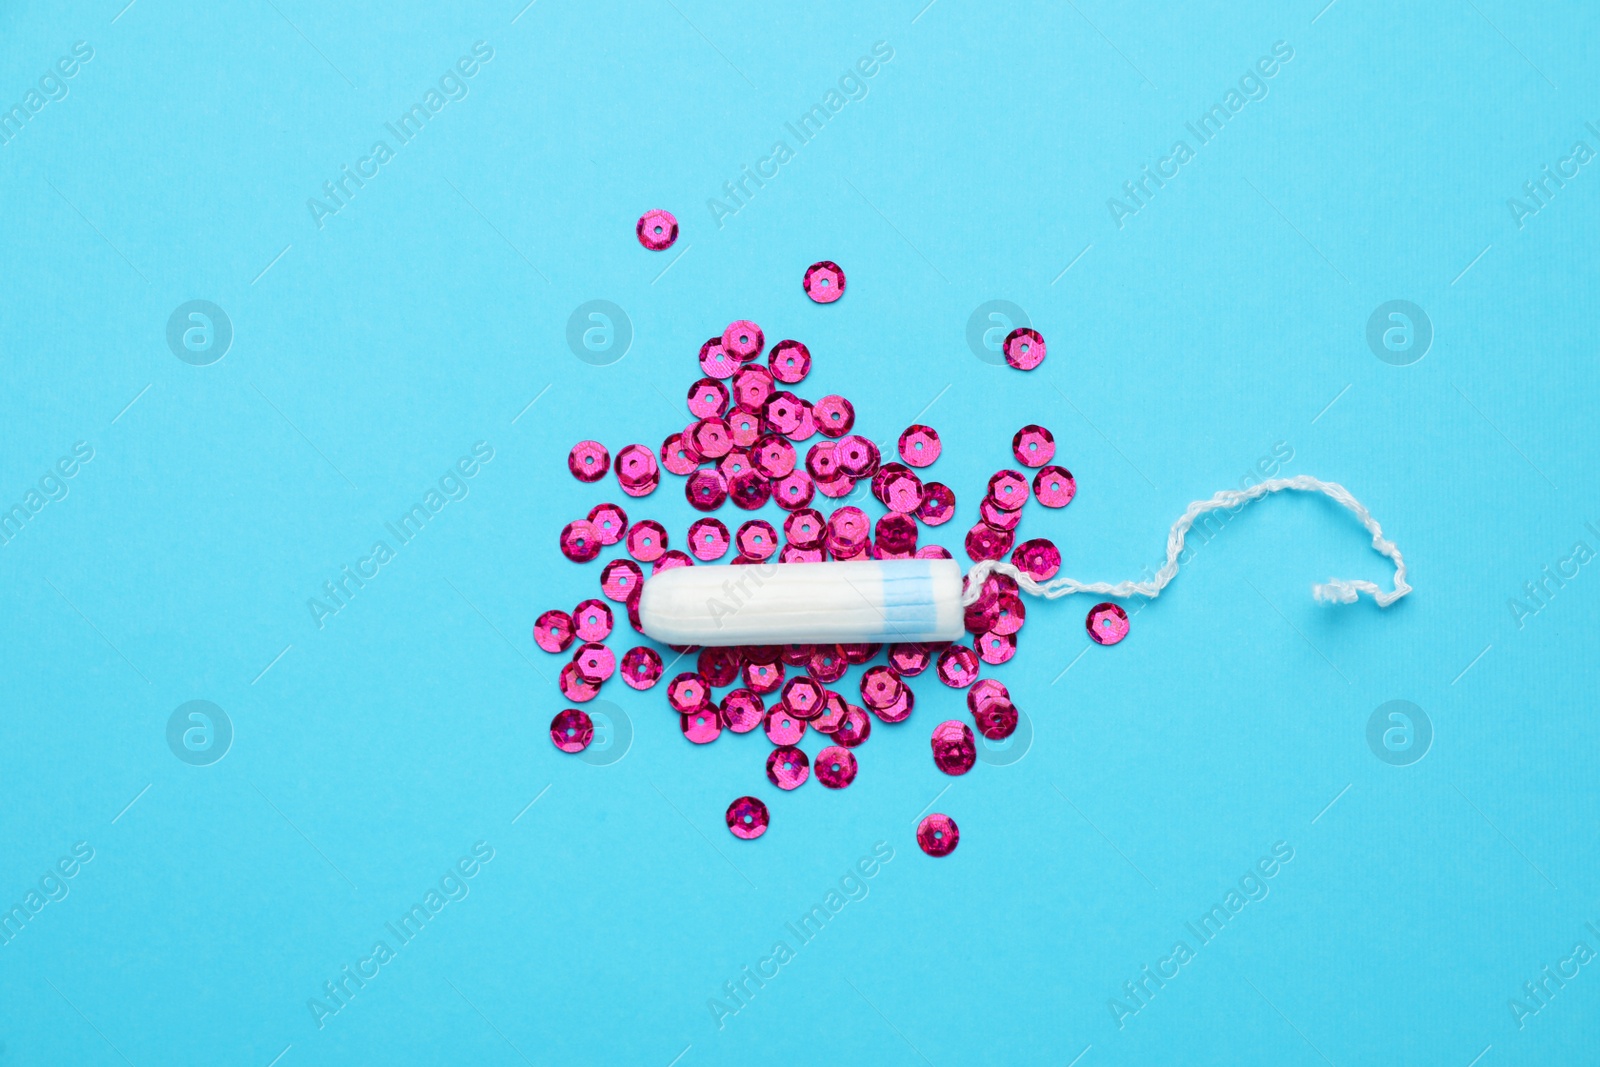 Photo of Tampon and pink sequins on light blue background, flat lay. Menstrual hygiene product